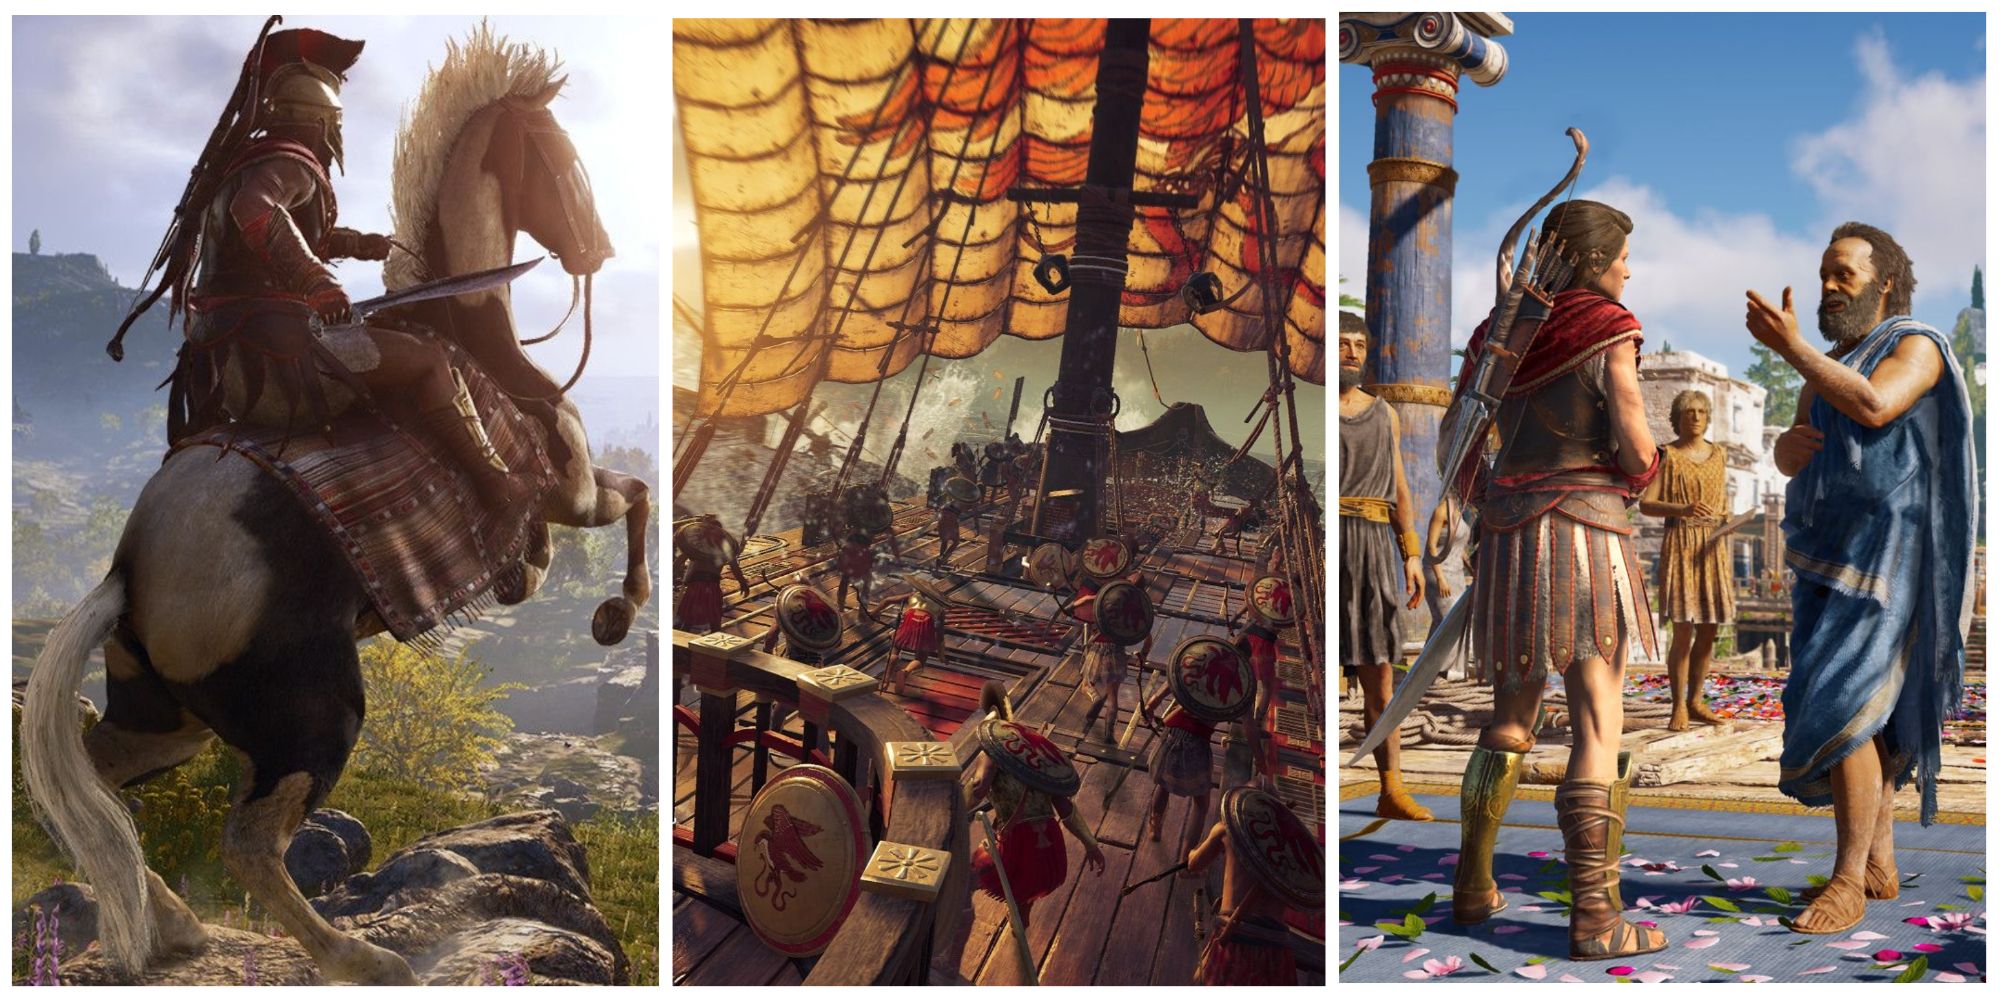 Split image of Assassin's Creed Odyssey: a horse, a ship, a conversation